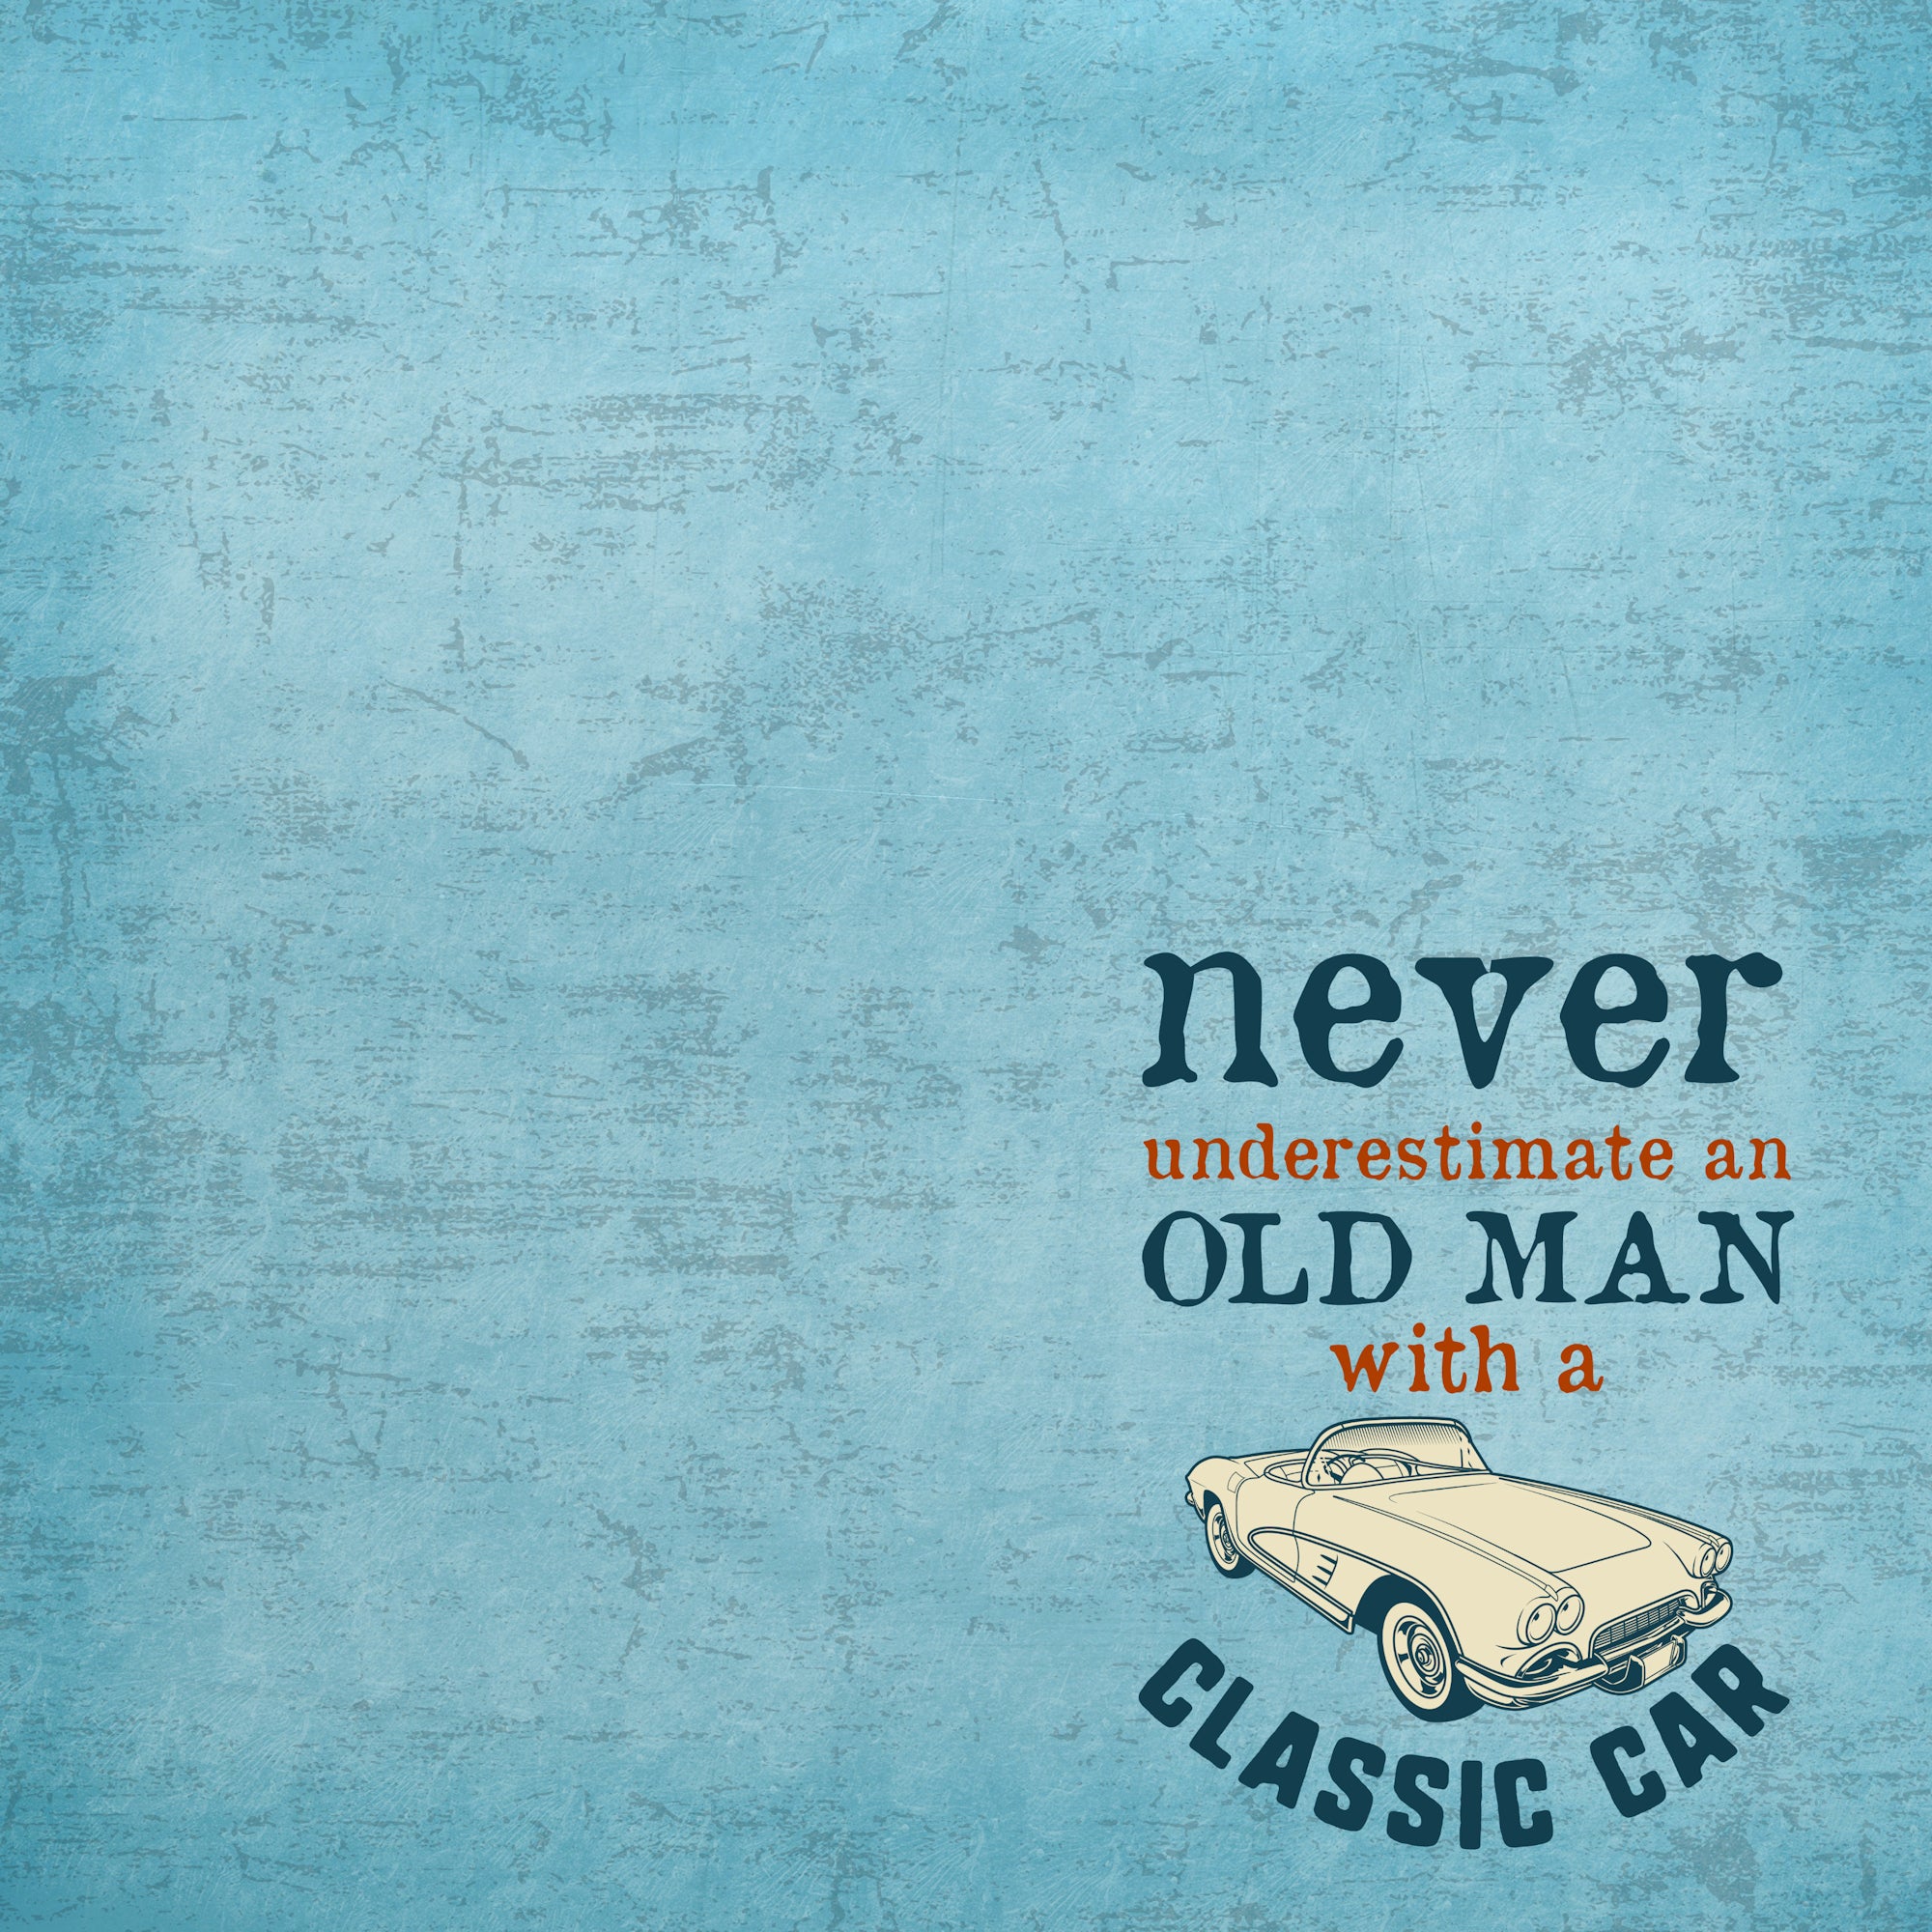 Classic Cars Collection Old Men & Classic Cars 12 x 12 Double-Sided Scrapbook Paper by SSC Designs